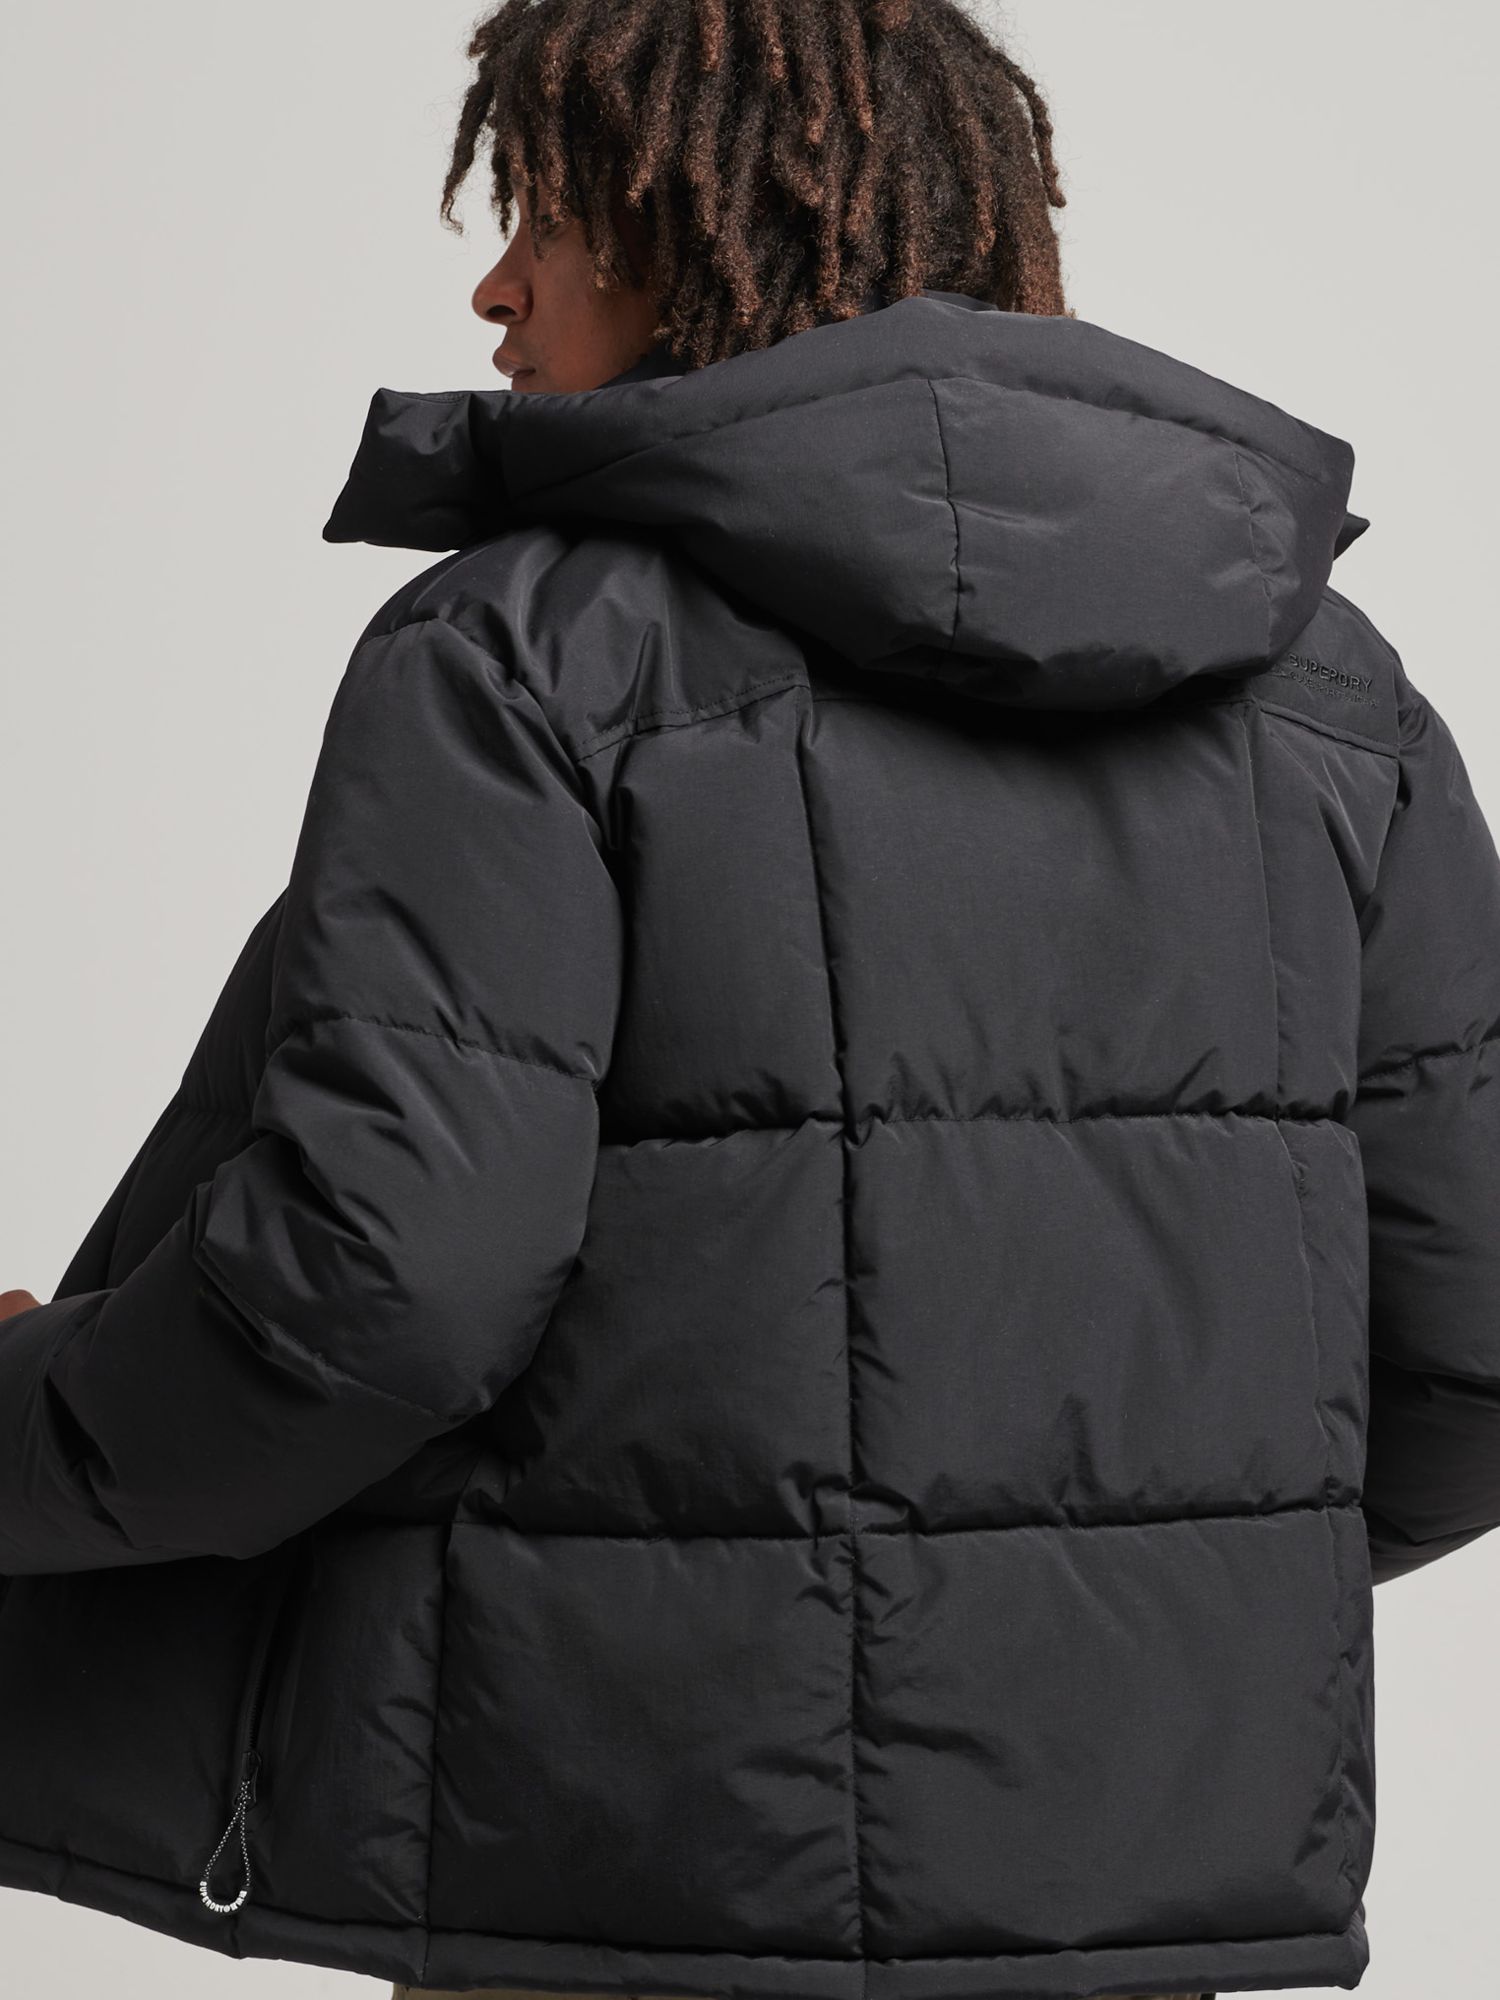 Superdry Hooded Box Quilt Puffer Jacket - Men's Mens Jackets